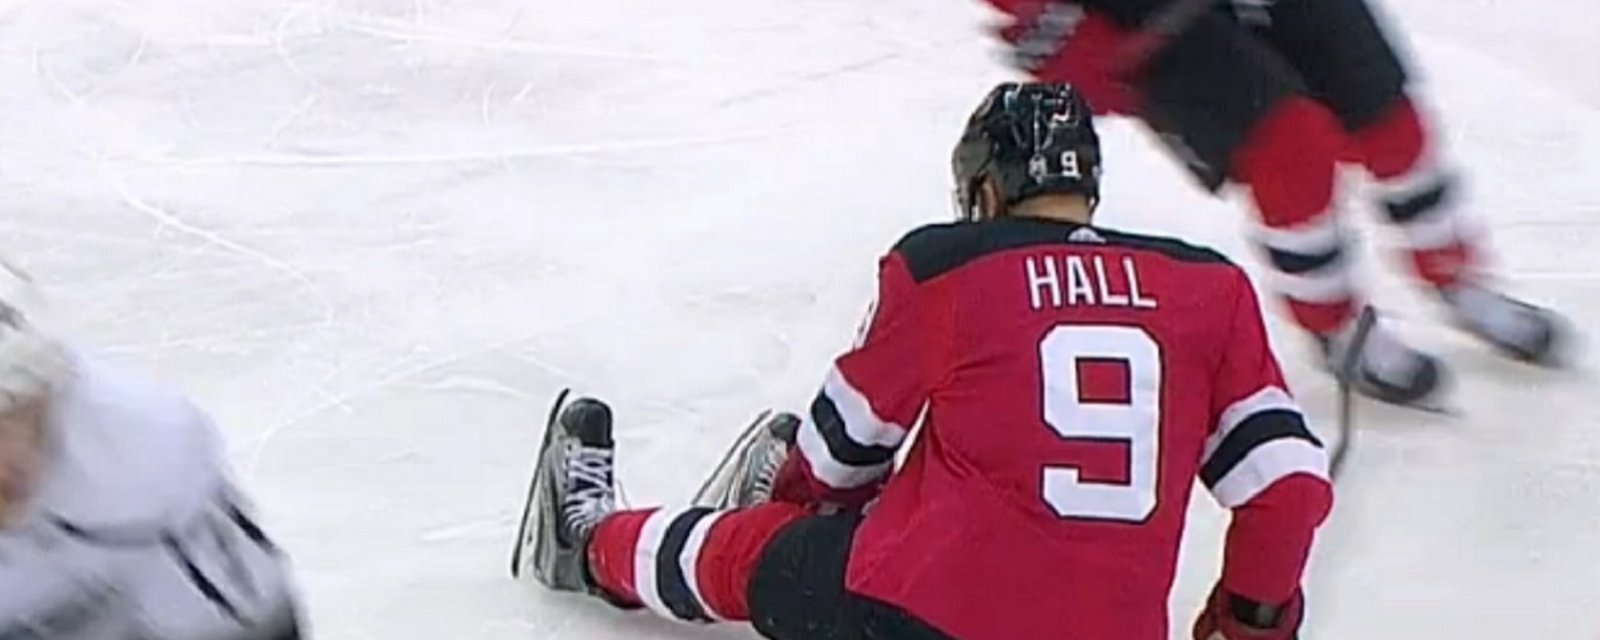 Two goal night for Taylor Hall ends with hard knee-on-knee hit. 